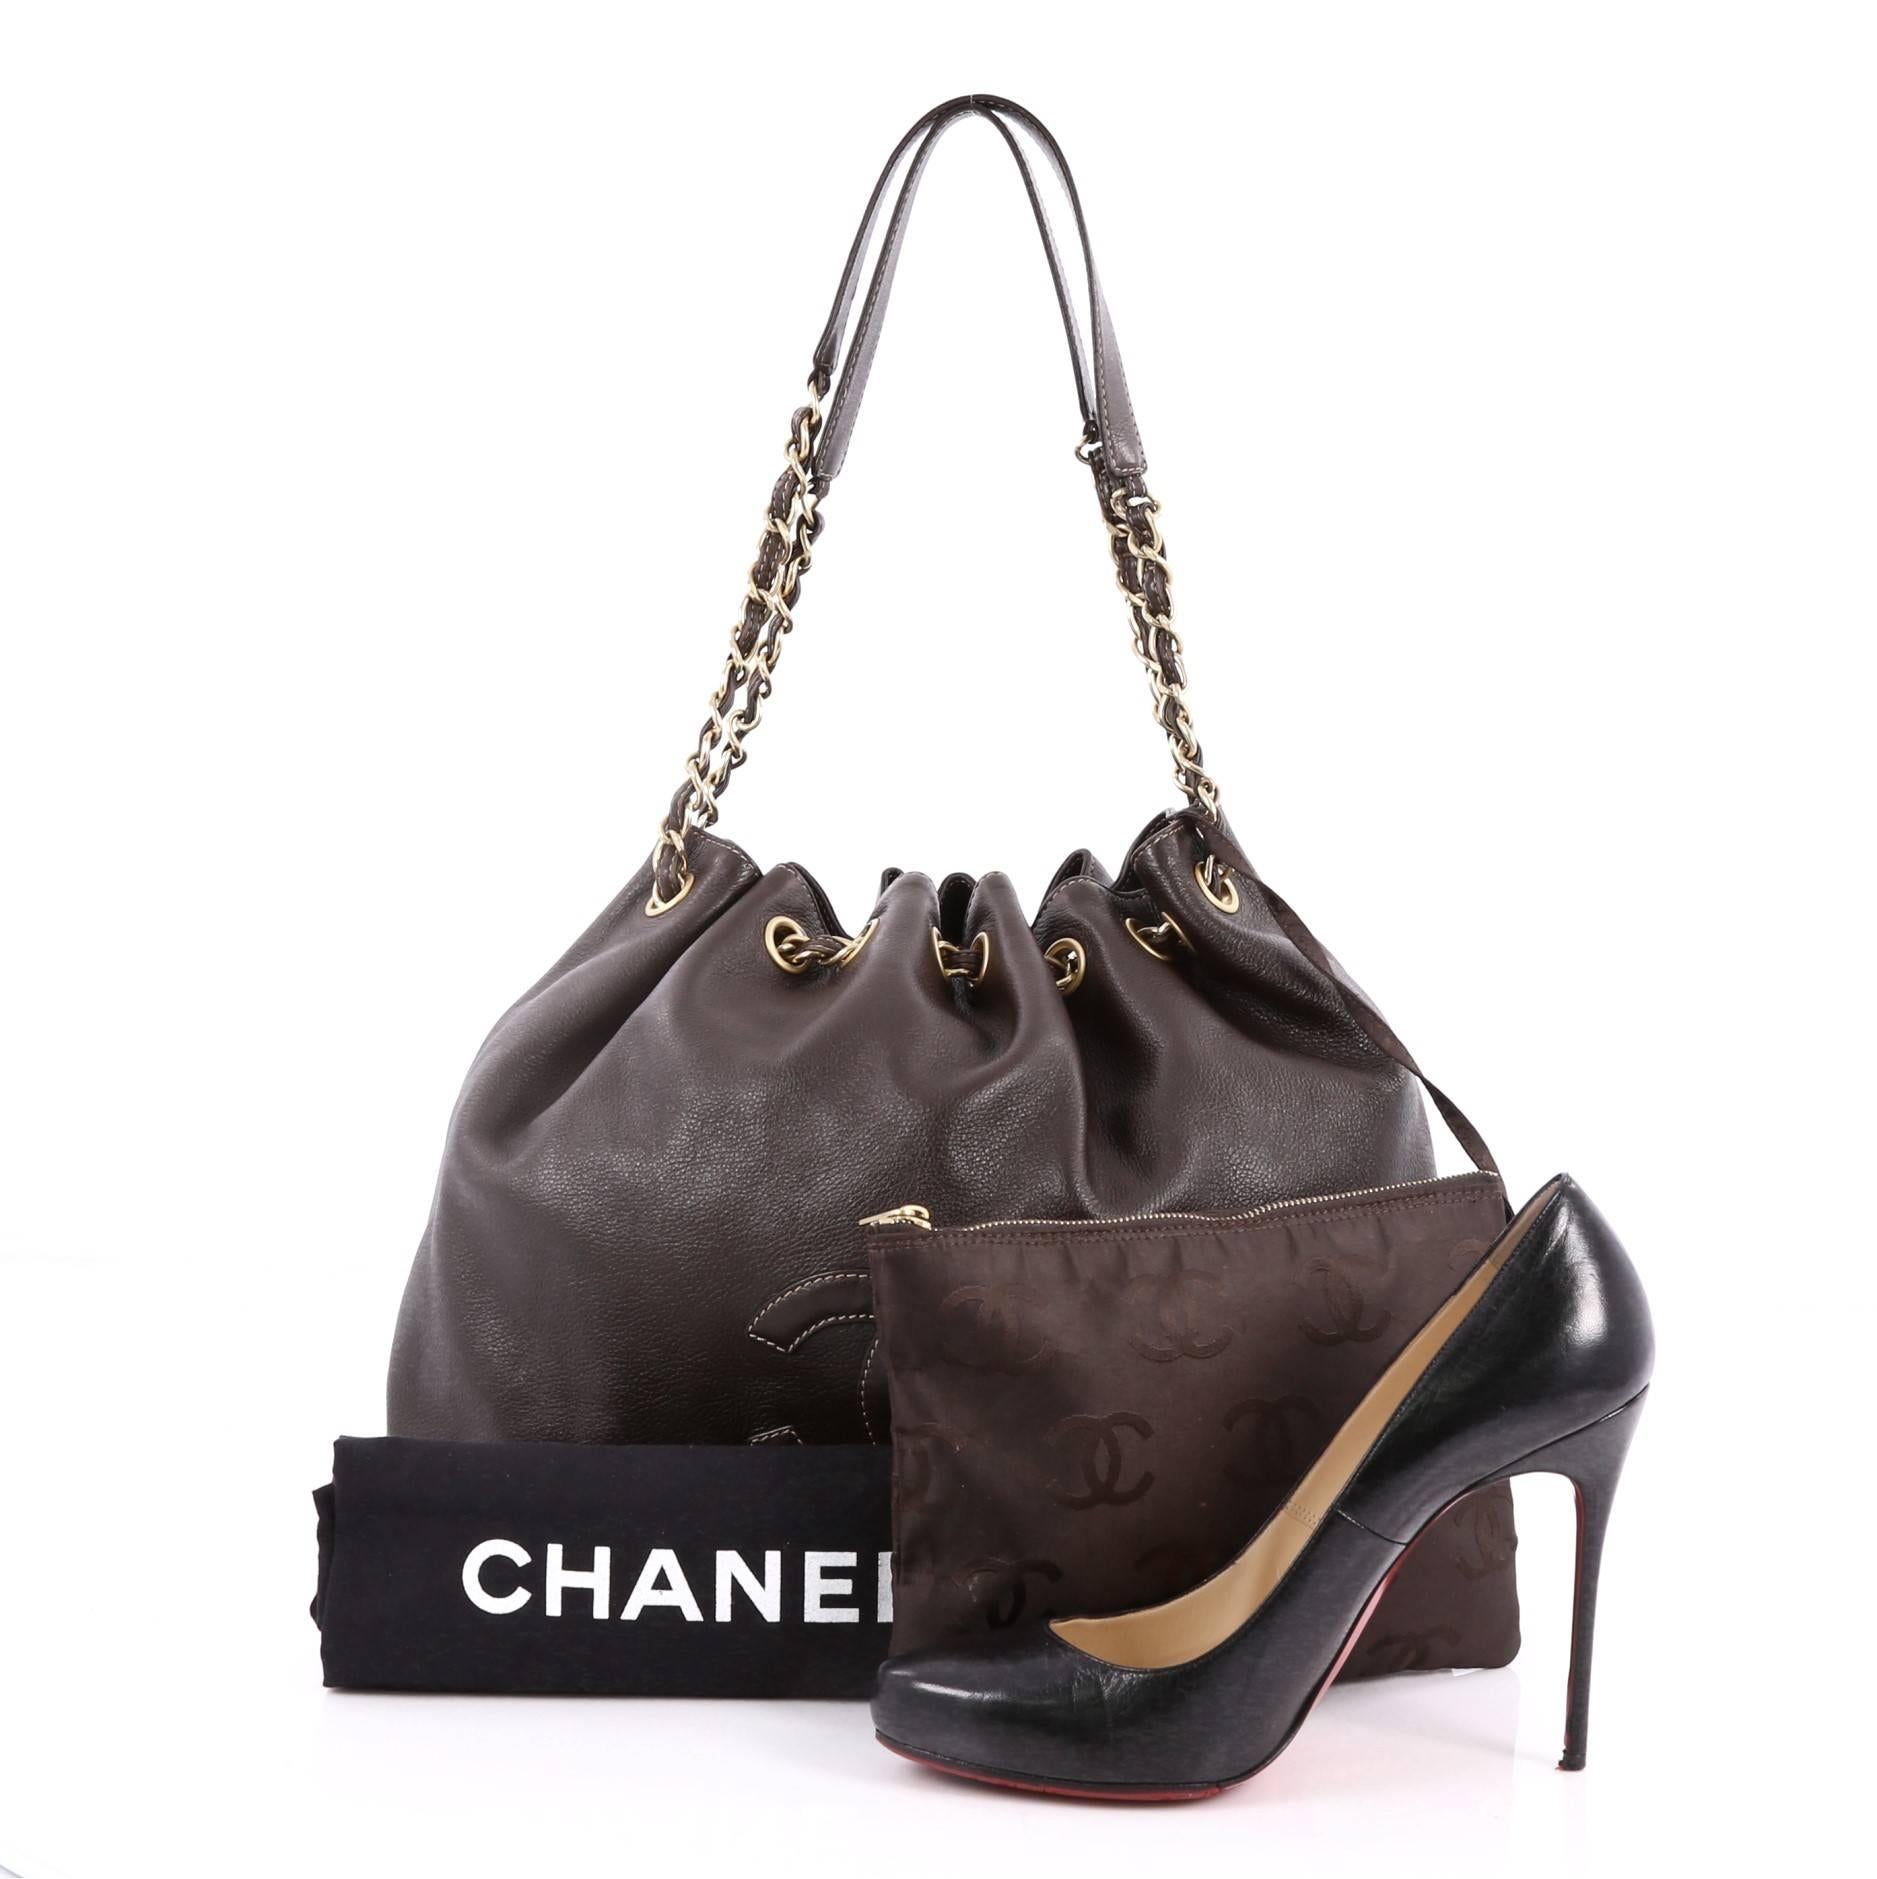 This authentic Chanel Vintage CC Drawstring Chain Shoulder Bag Leather Small is a timeless, elegant bucket bag that is ideal for everyday use. Crafted in dark brown leather, this chic shoulder bag features long gold woven-in leather chain link